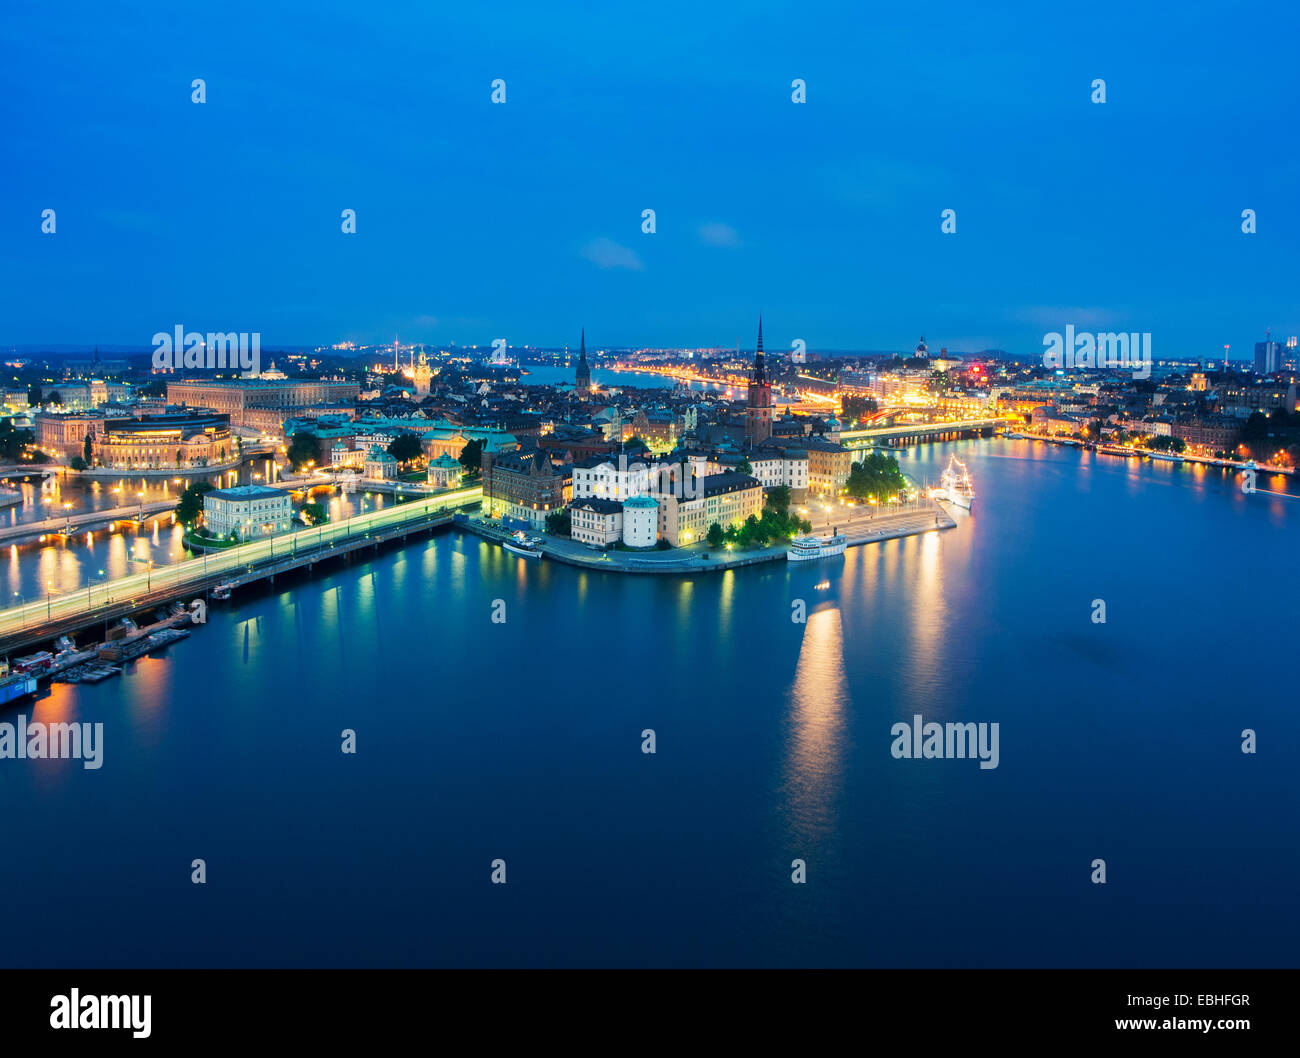 Waterfront and city lights at night, Stockholm, Sweden Stock Photo